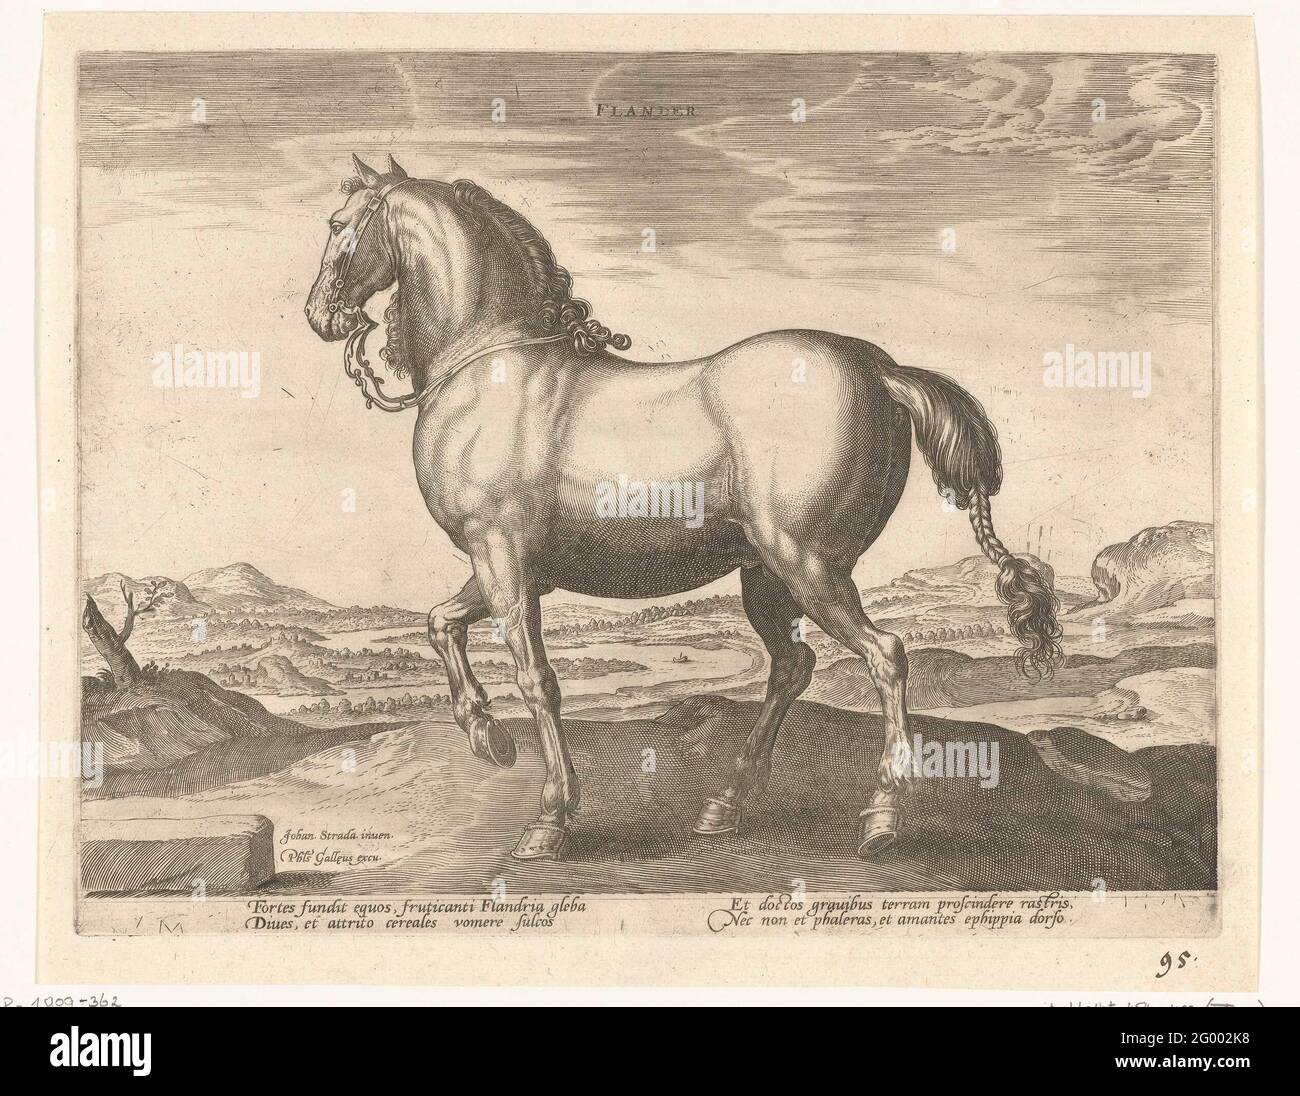 Horse from Flanders; Flander; Horse breeds from the Royal Stables of Don  Juan from Austria; Equile Ioannis Austriaci Caroli. A Flemish horse, in  profile. The print has a Latin caption and is